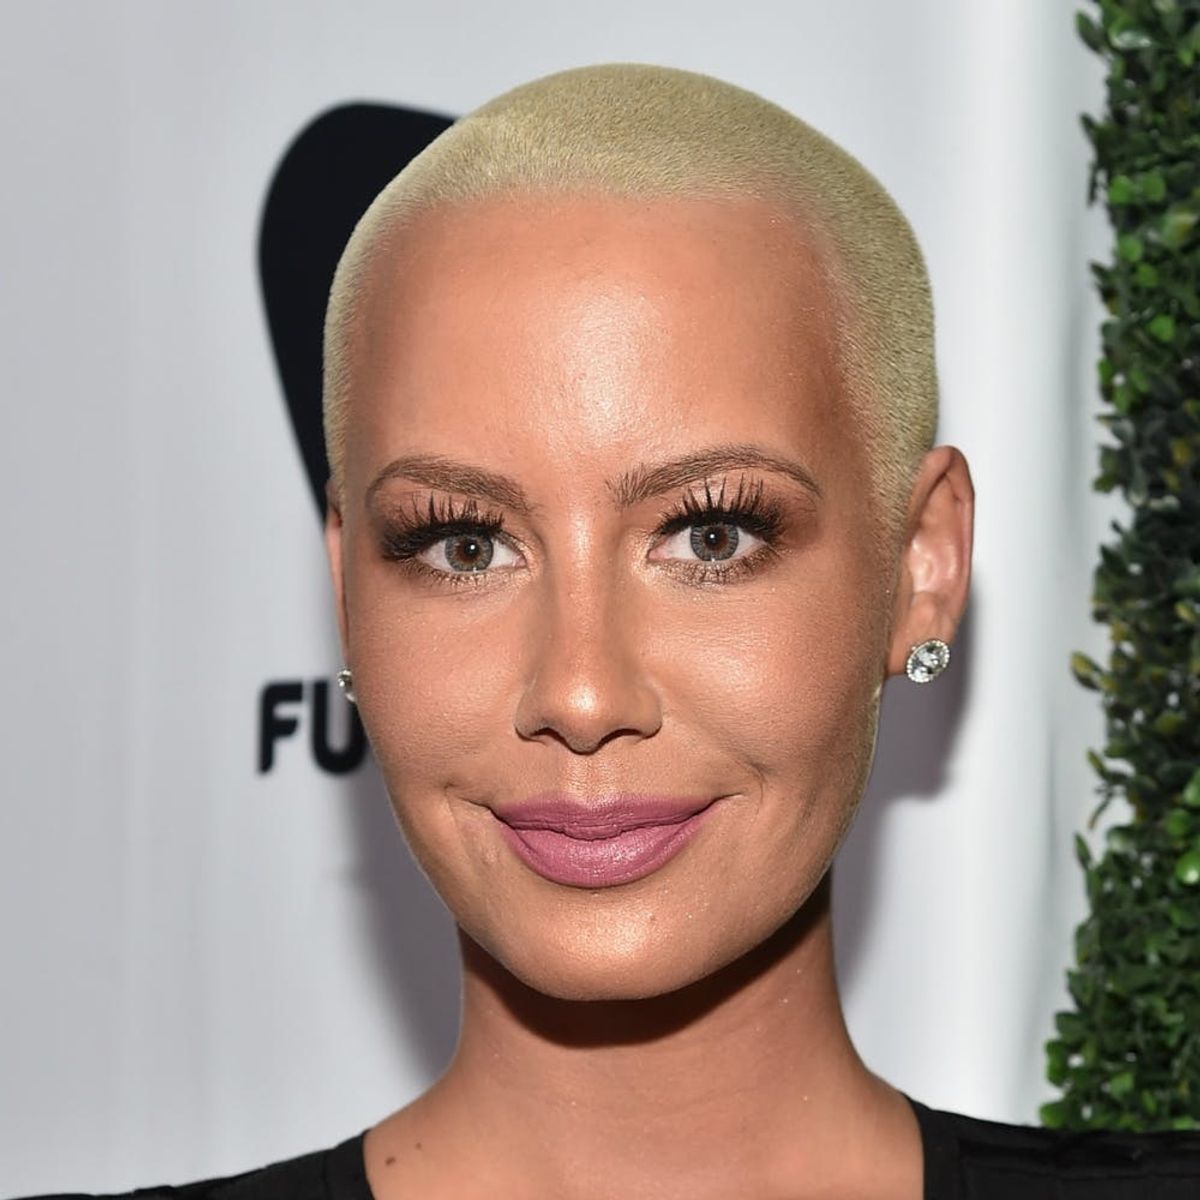 Amber Rose Just Broke Her Silence on the Taylor/Kanye Feud